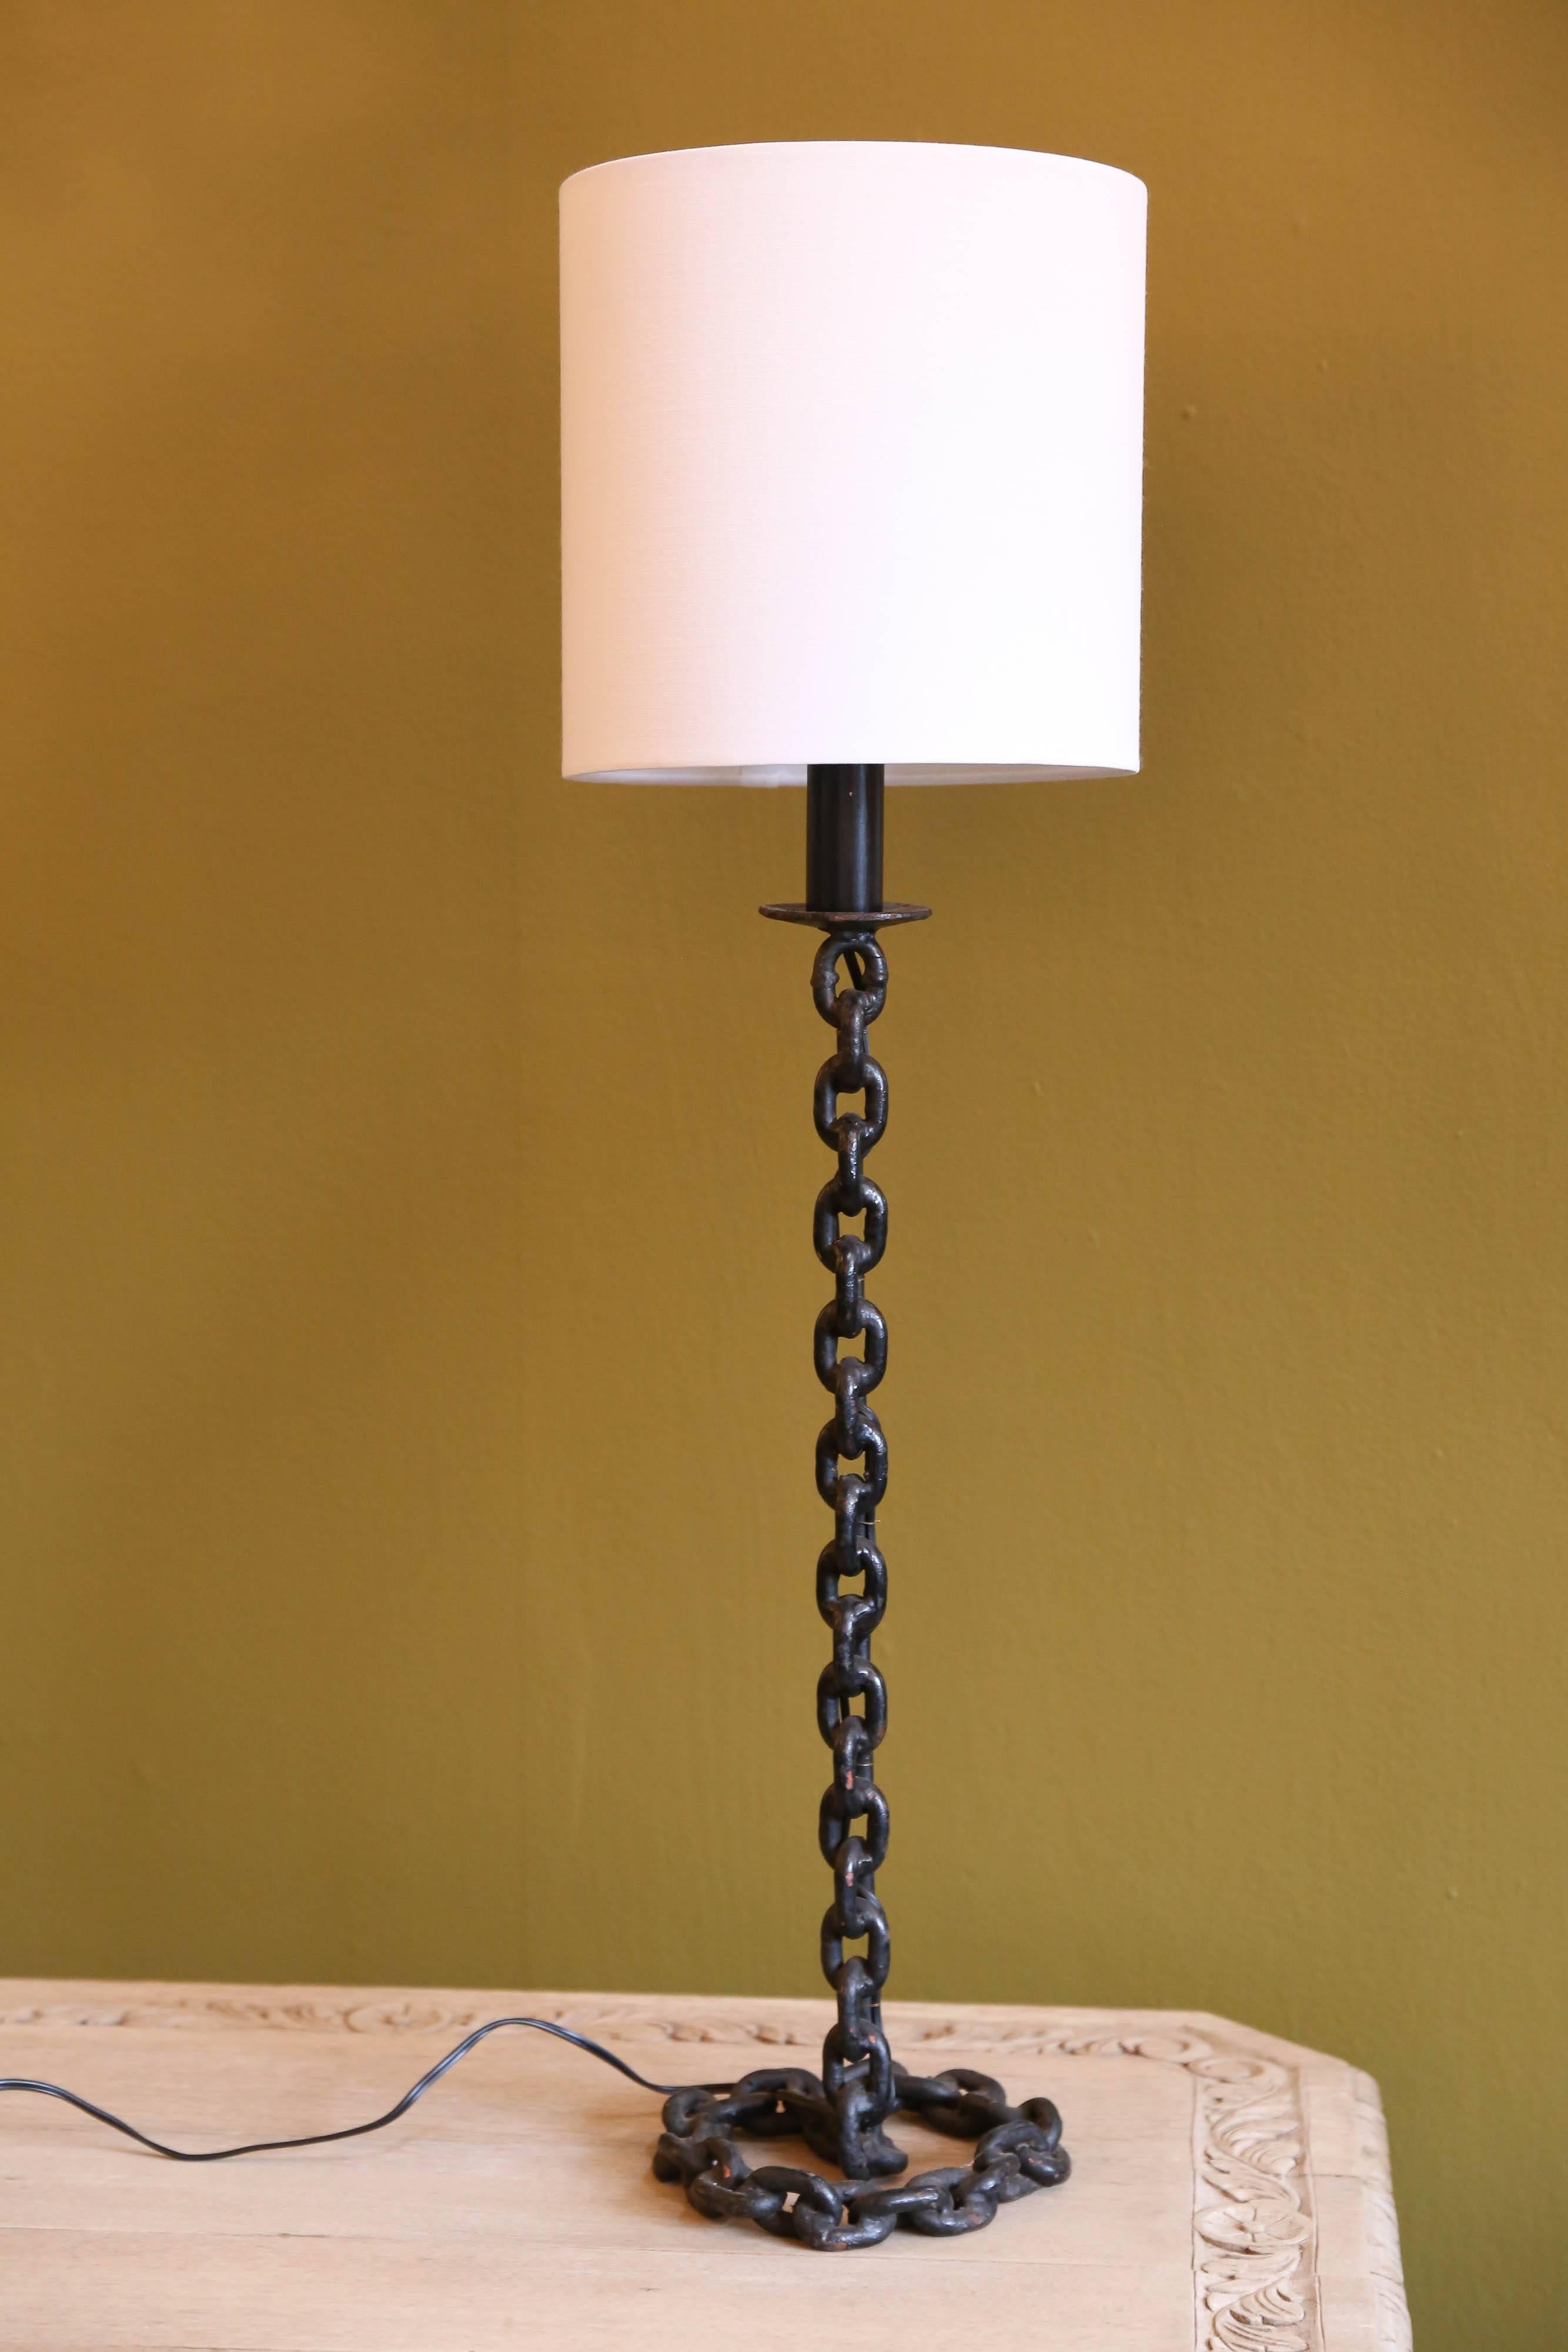 Handcrafted, vintage, painted and soldered iron chain link lamp with fabric shade. Chain coils at the base to make the stand. Newly wired with all UL listed parts and a single Edison socket and black plastic cord. Harp and saddle configuration.